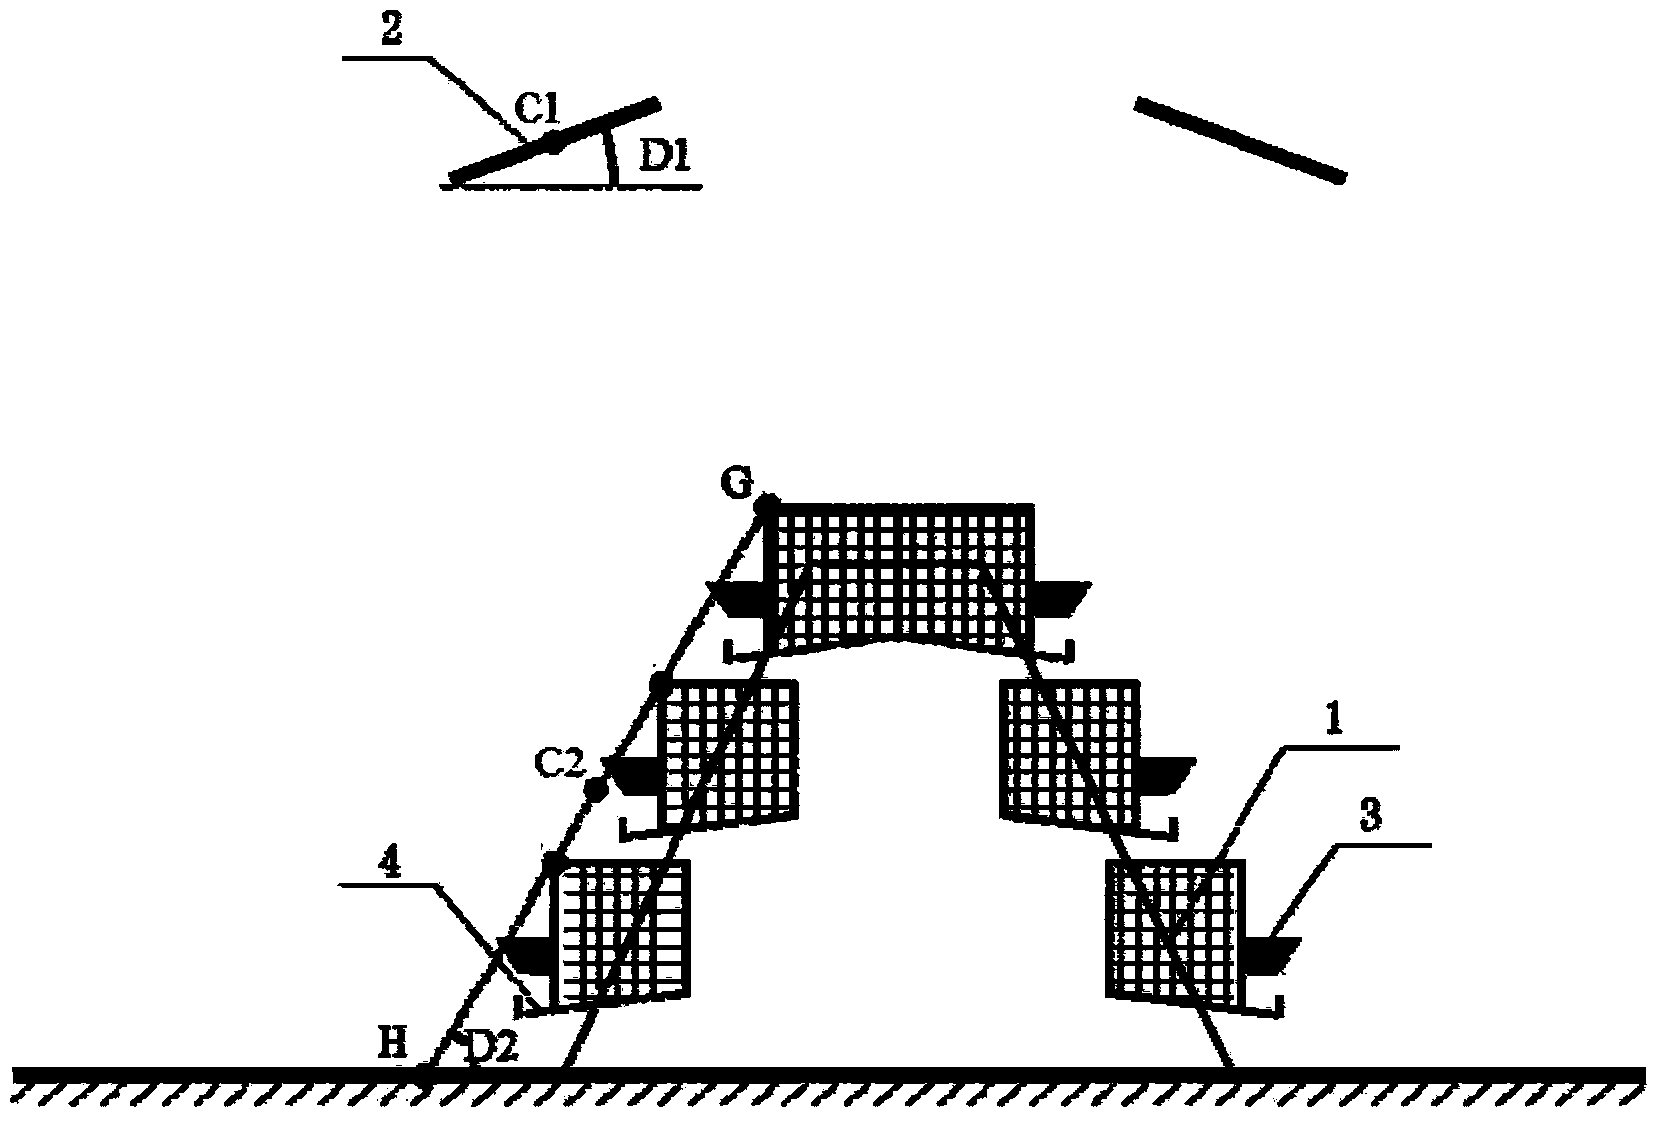 LED lamp illumination method and system for scale culture of laying or breeding hens in trapezoidal coops